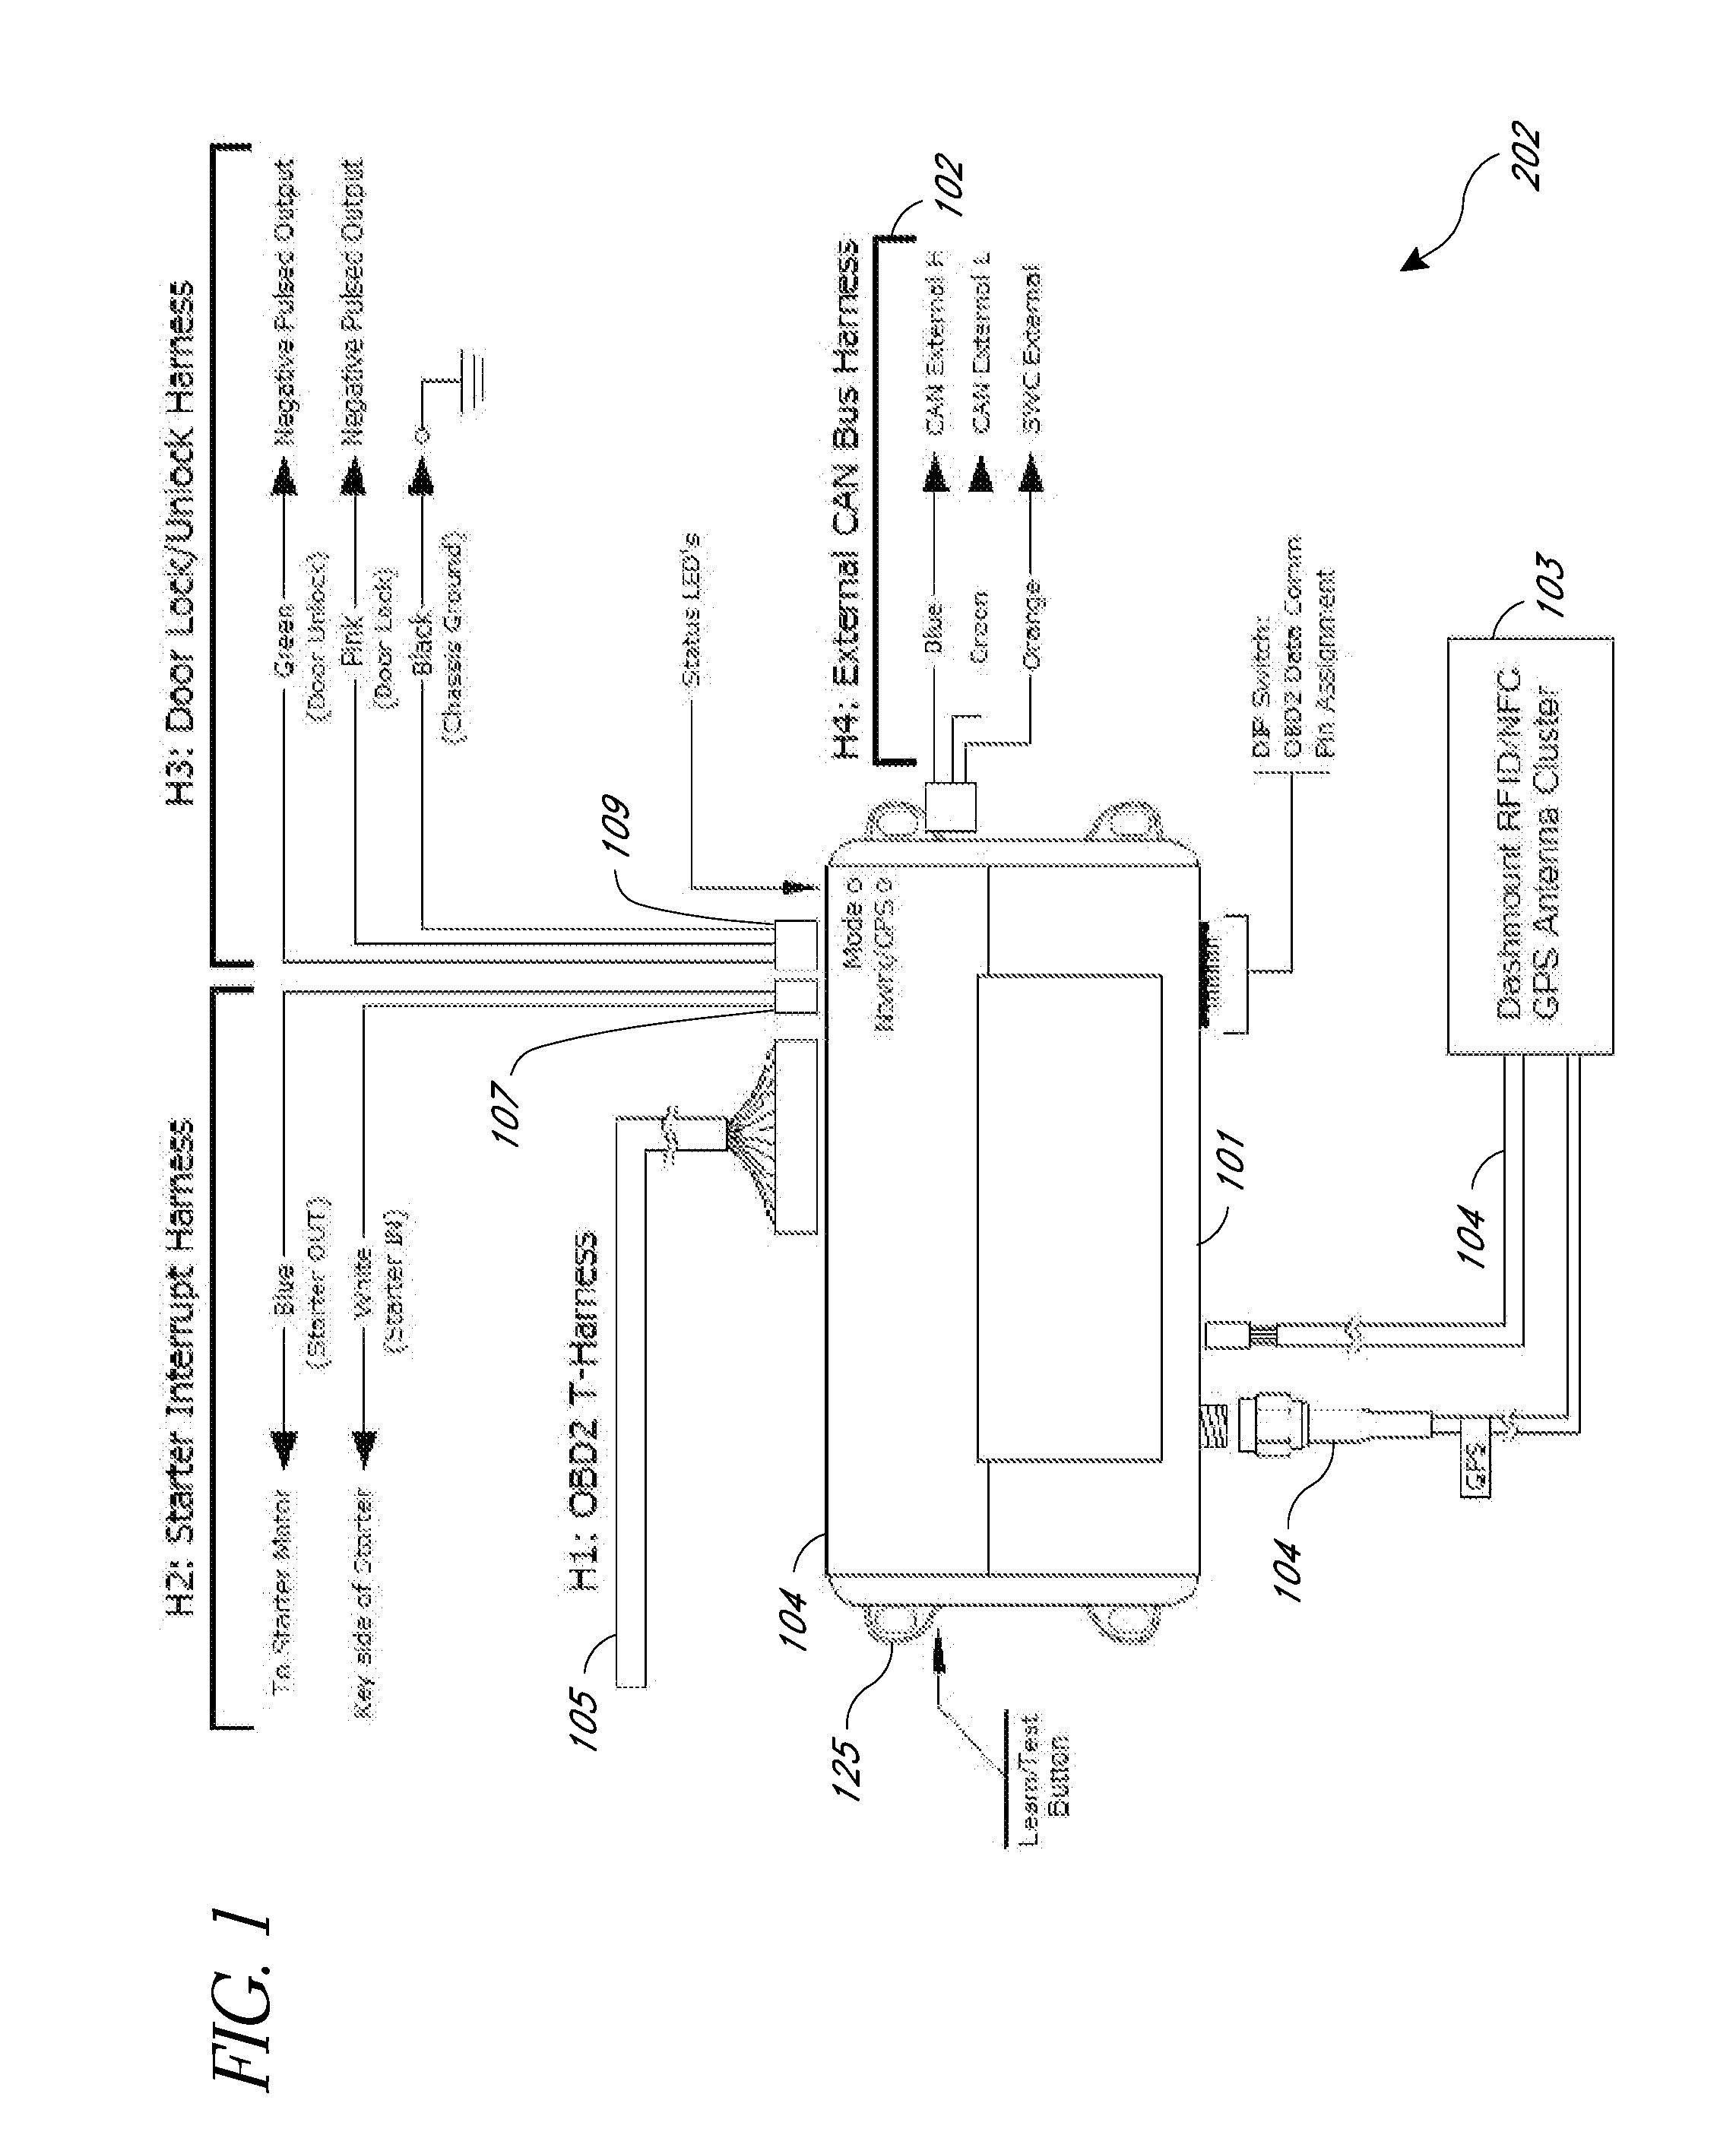 Rental/car-share vehicle access and management system and method